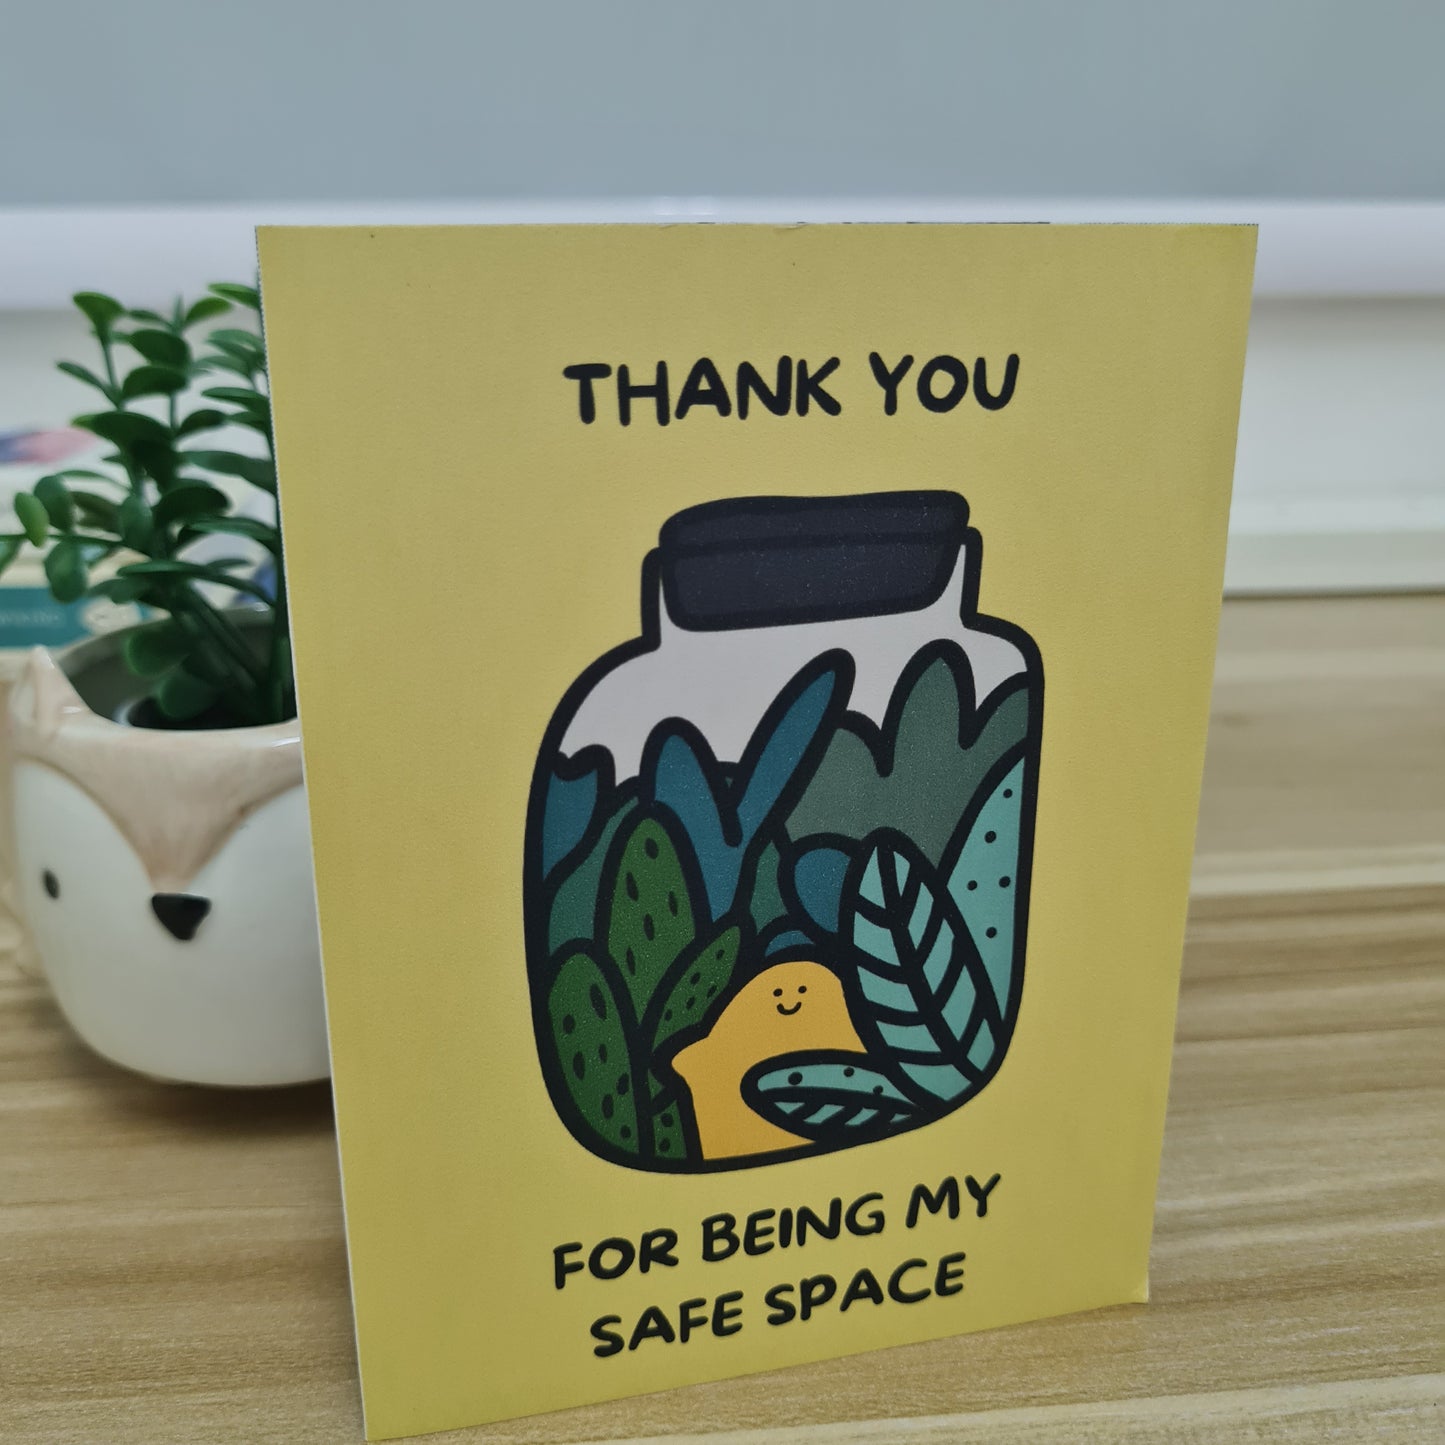 GREETING CARD - "SAFE SPACE" by KAYA TOAST FOR THE SOUL